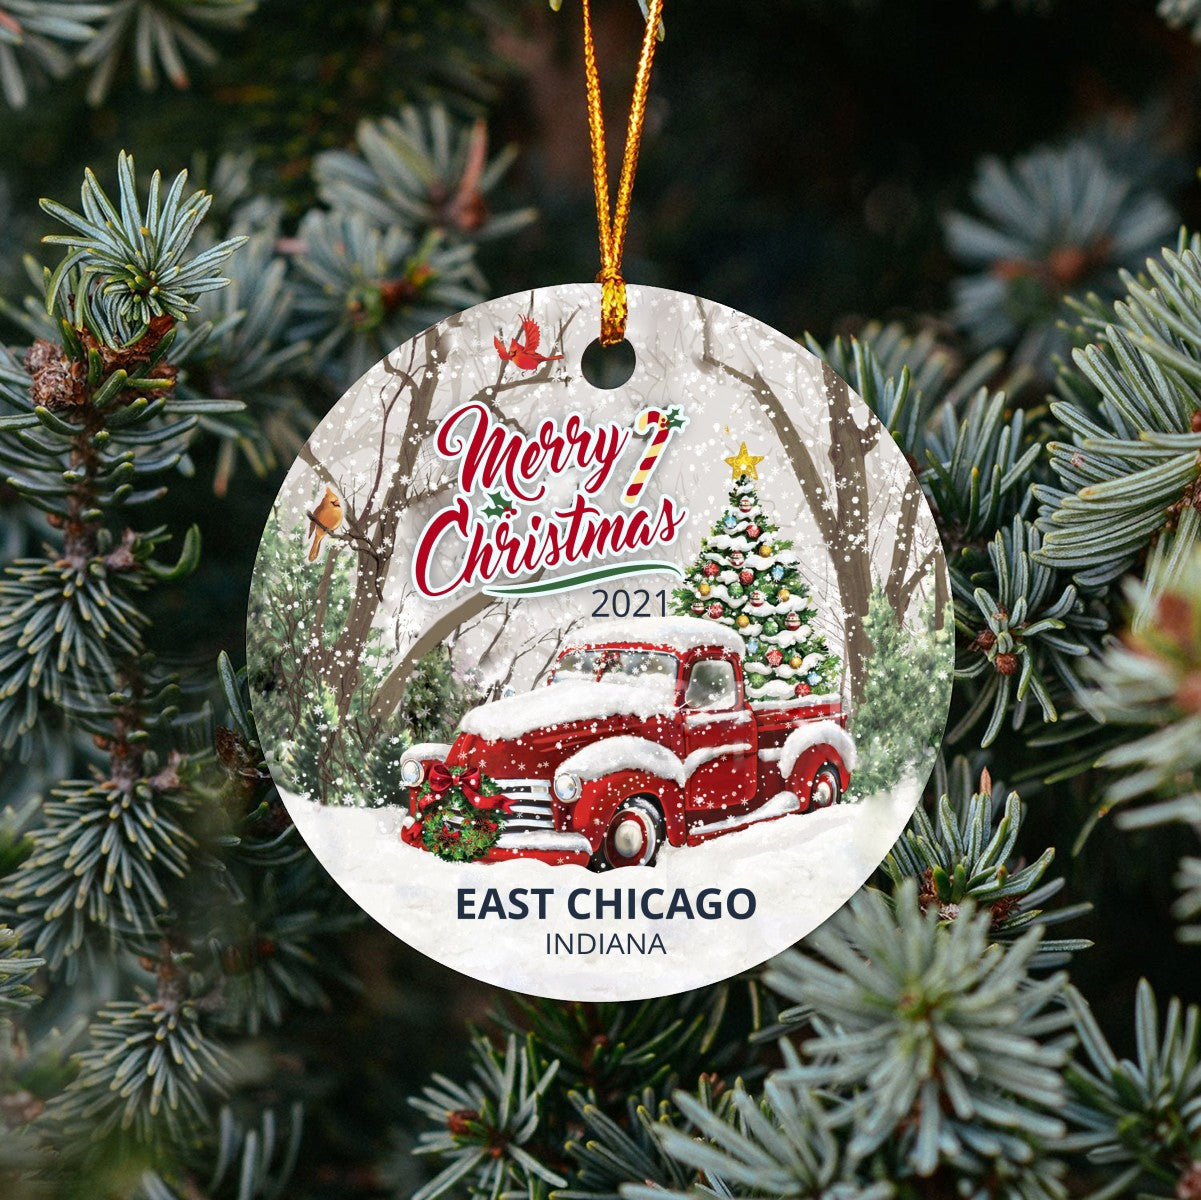 Christmas Tree Ornaments East Chicago - Ornament With Name City, State East Chicago Indiana IN Ornament - Red Truck Xmas Ornaments 3'' Plastic Gift For Family, Friend And Housewarming